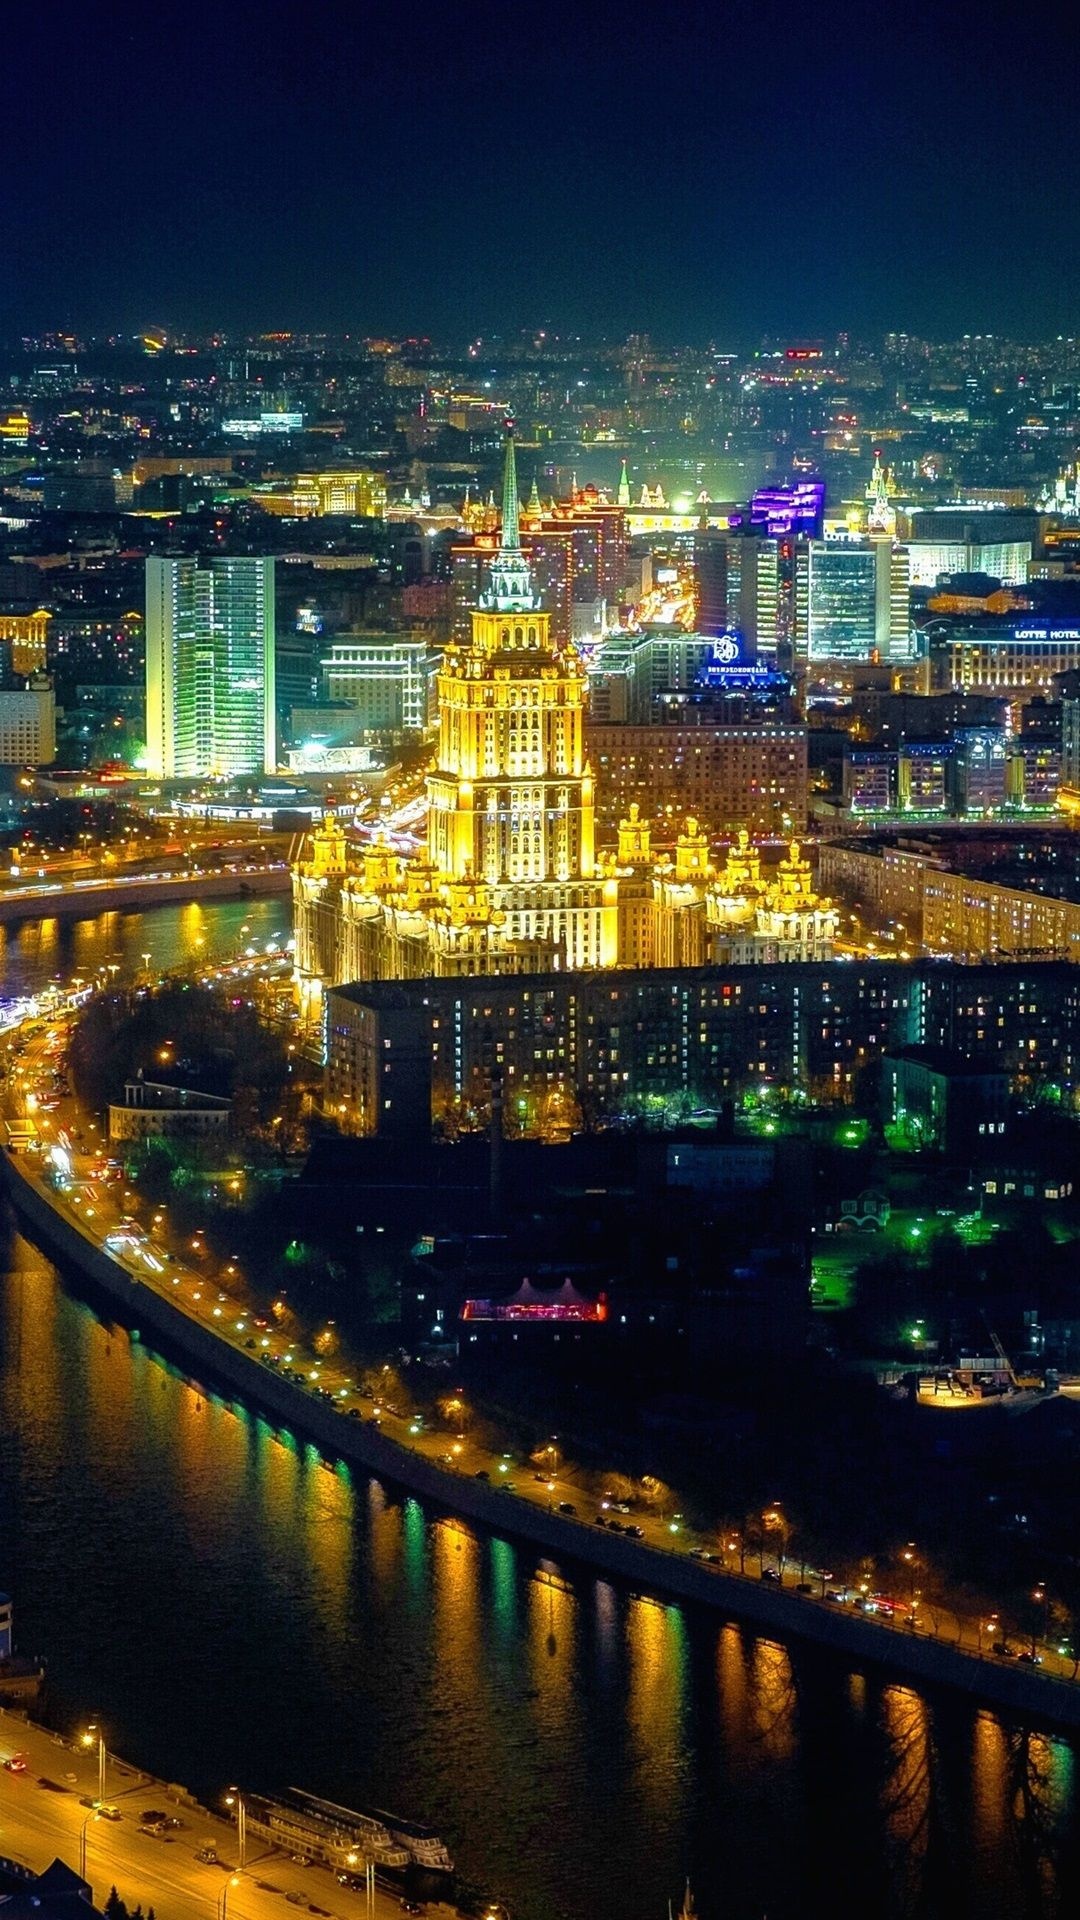 Moscow: The city is situated on the banks of the Moskva River. 1080x1920 Full HD Wallpaper.